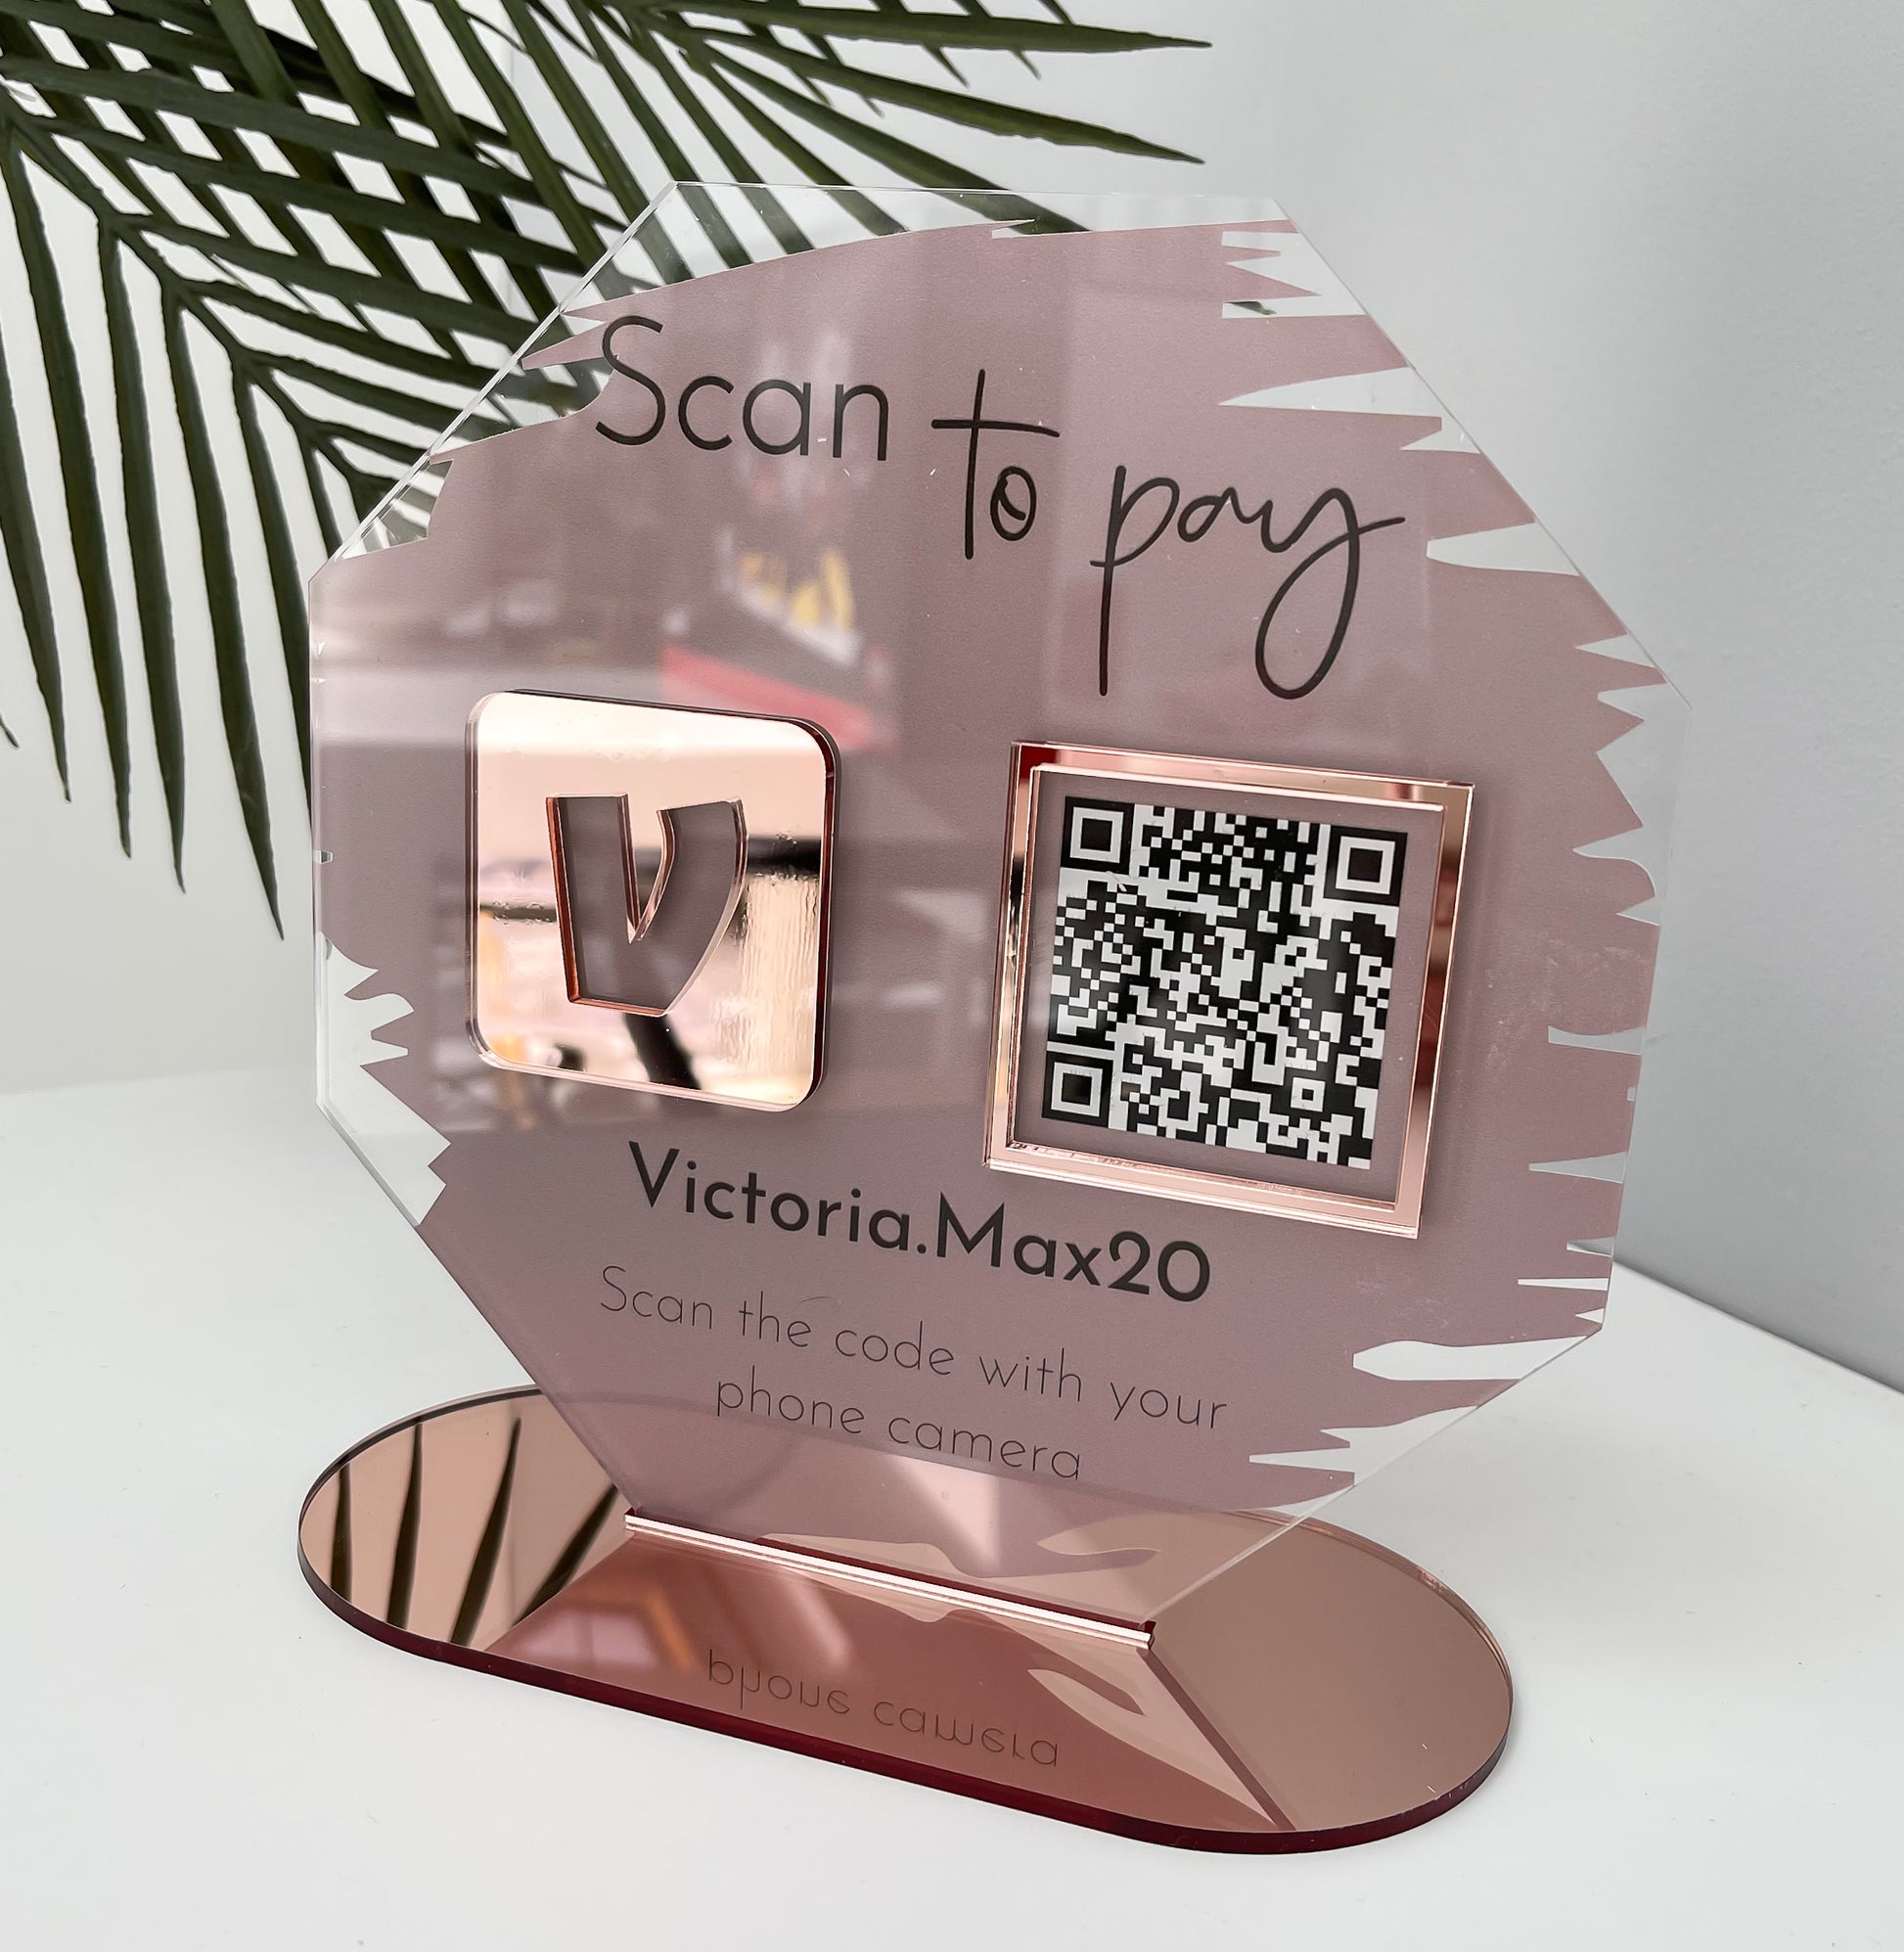 Octagon Icon with Single QR Code Business Payment Sign - V&C Designs Ltd